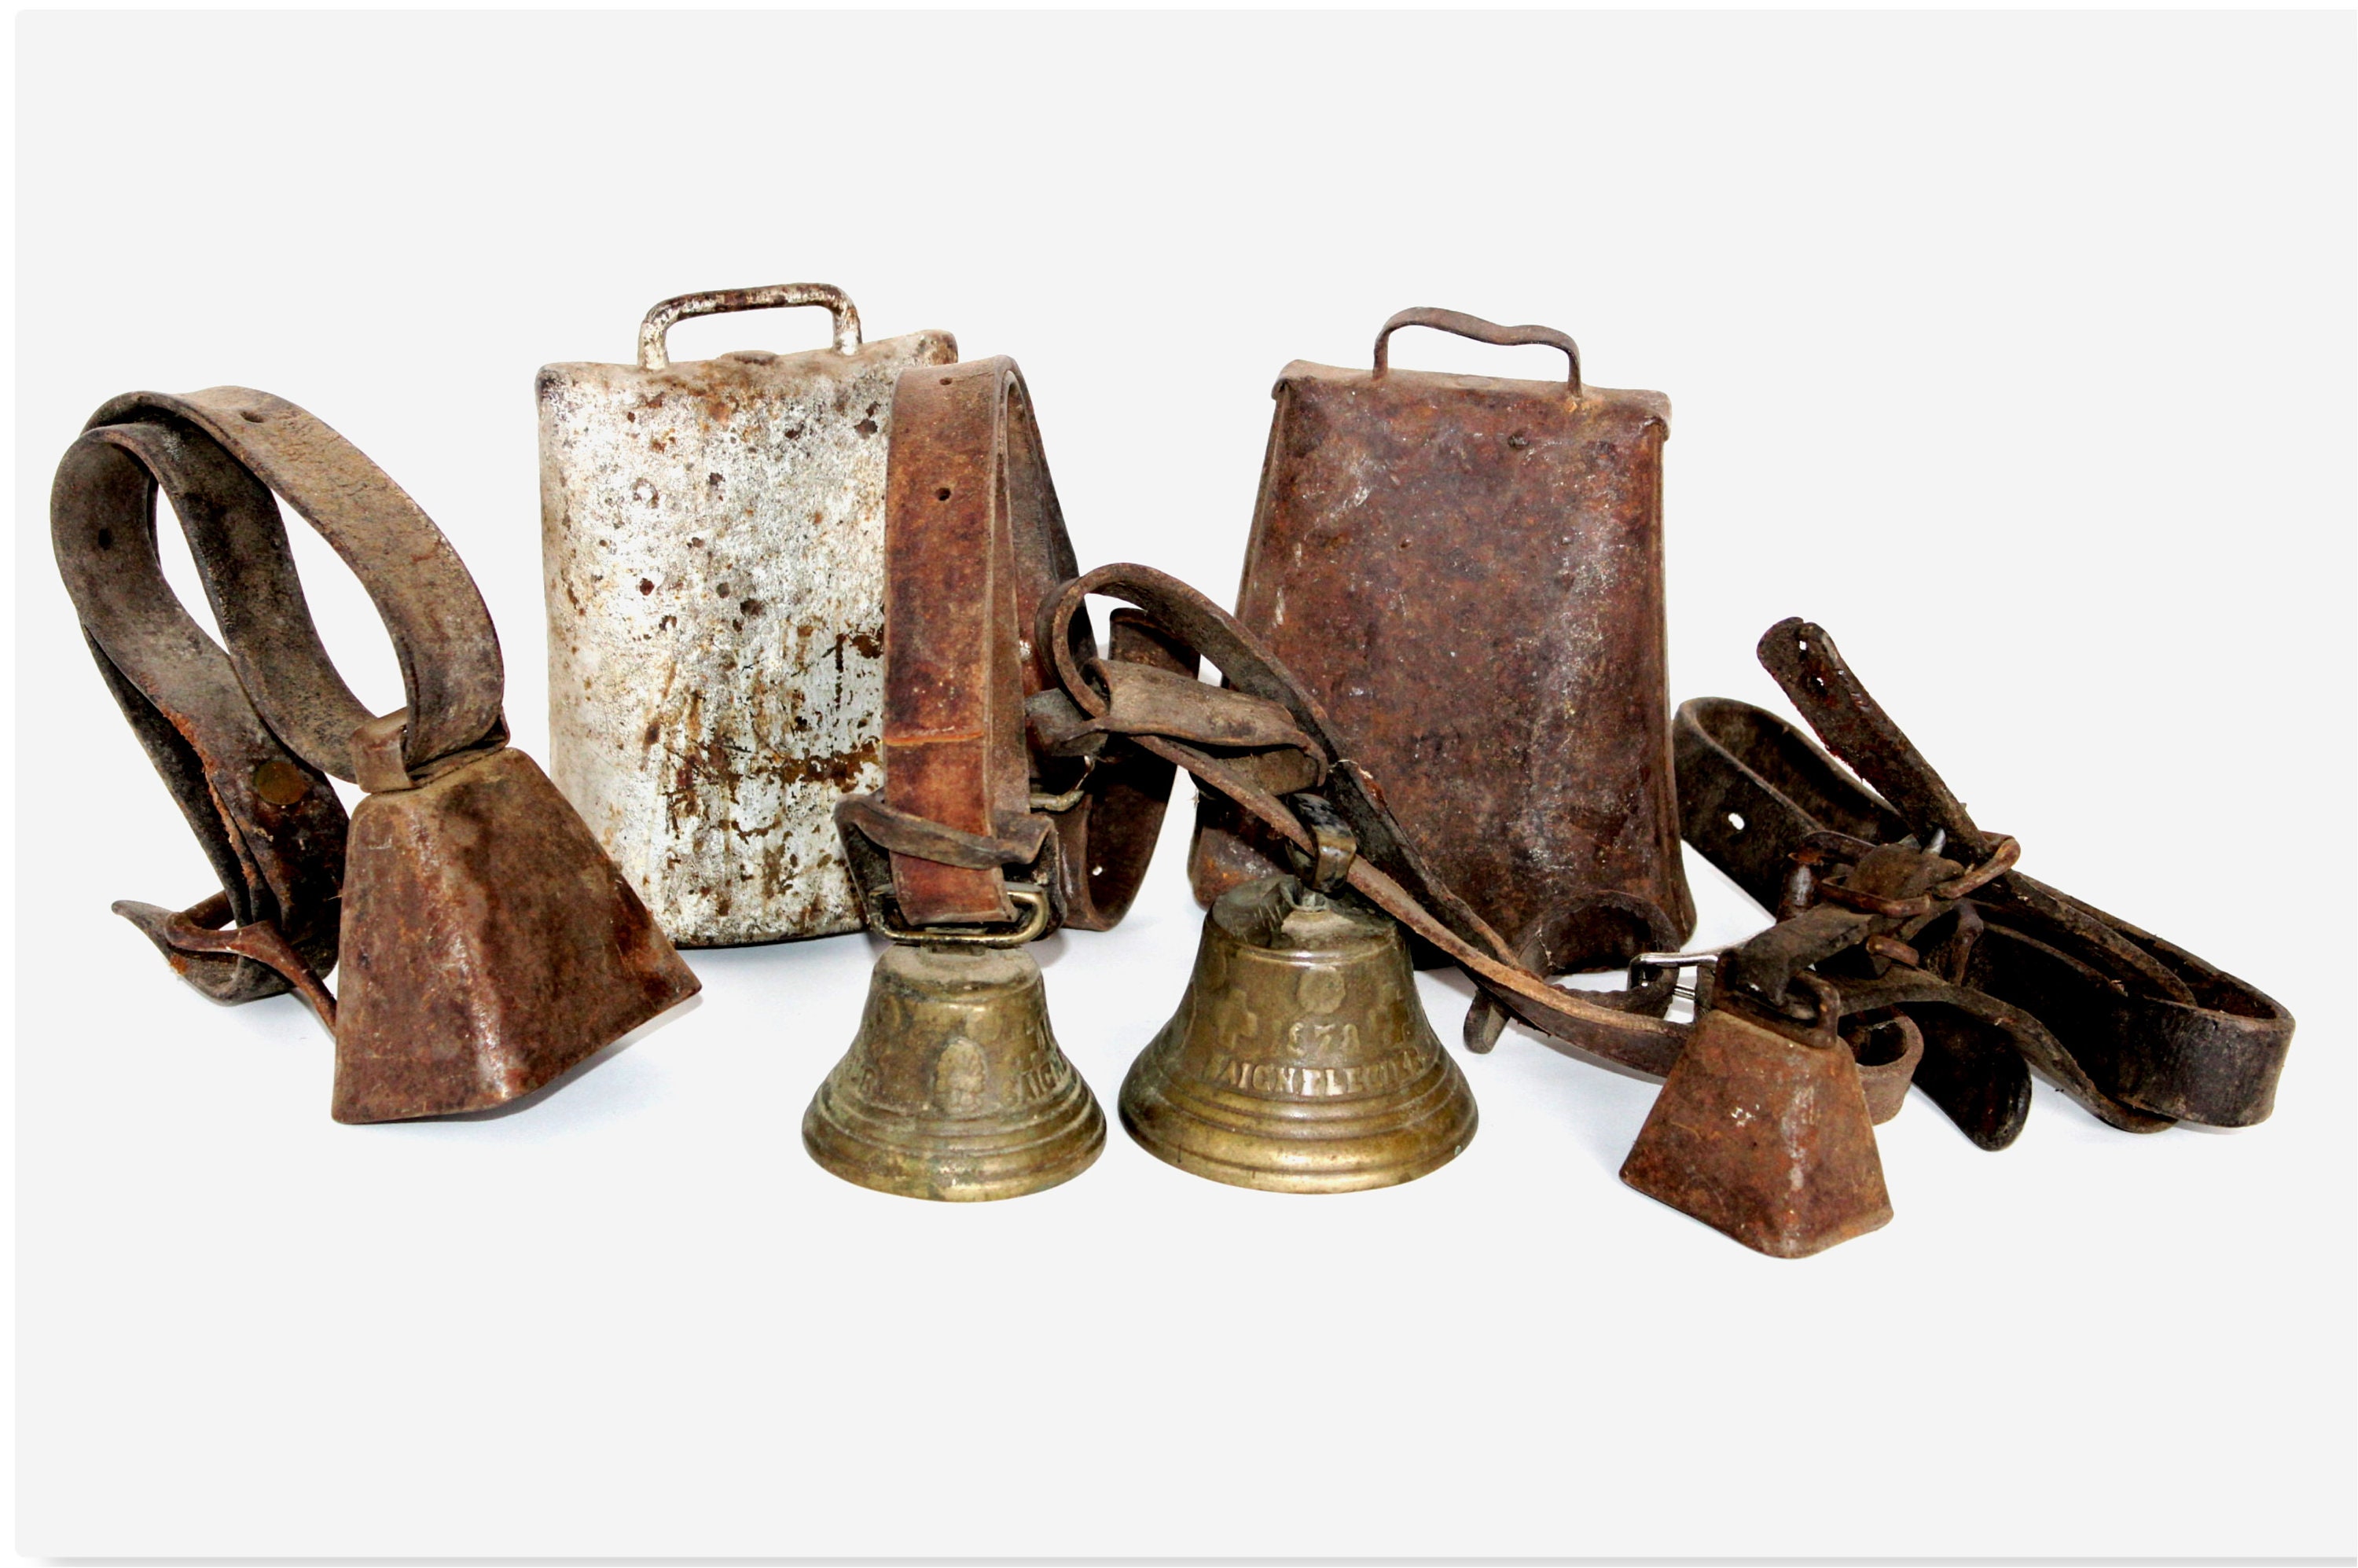 Collection of Antique Cow Bells, Chiantel Brass Cow Bells